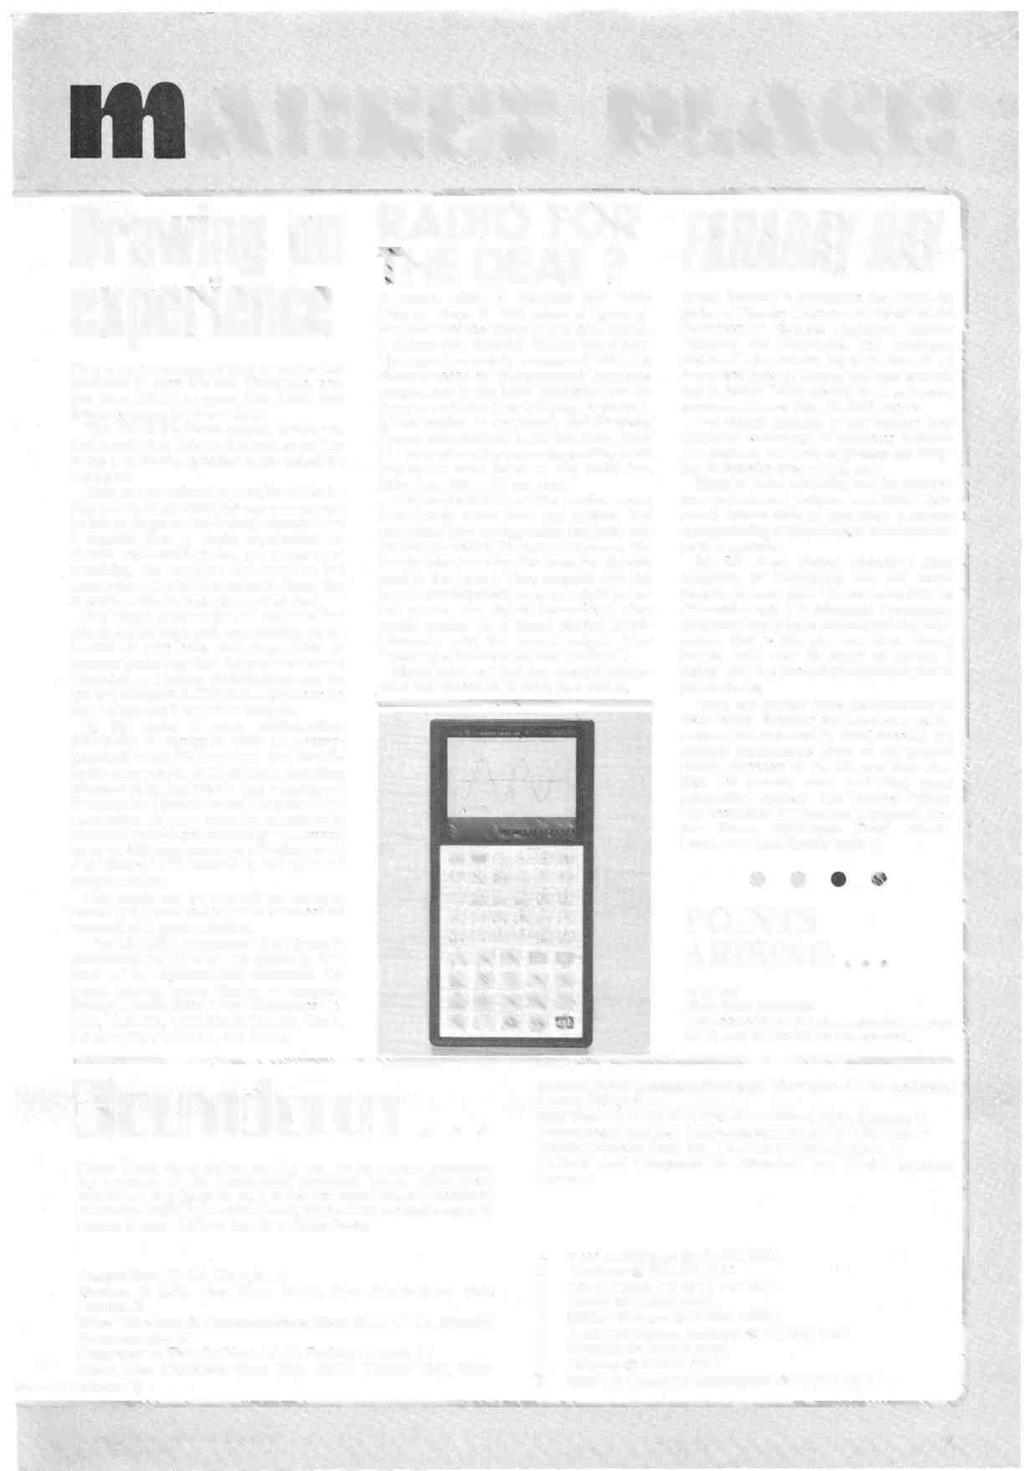 . The MARCH= puten Drawing on experience Now if you're wondering what to buy for the professor in your life this Christmas, and you have 99.95 to spare, how about this amazing calculator from Casio.